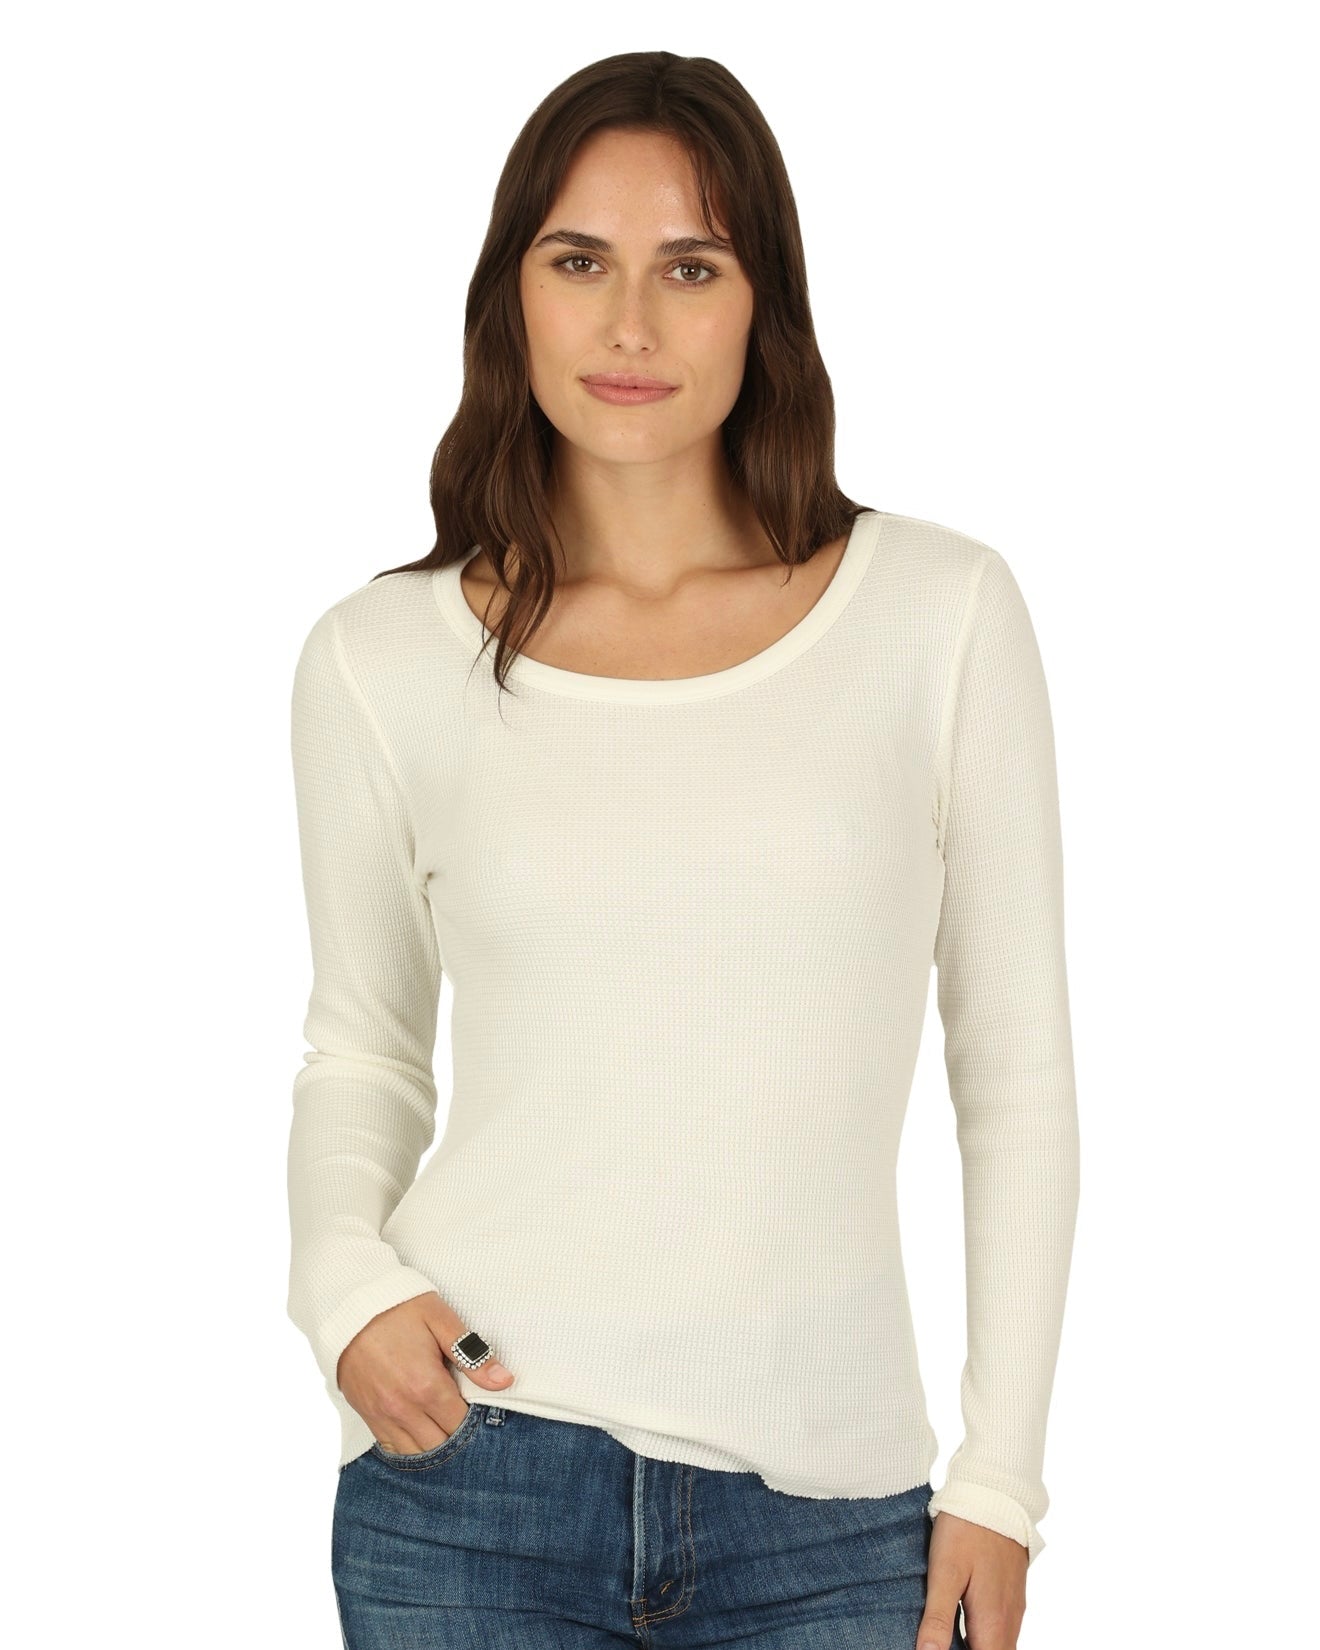 Model wearing Dylan Waffle Ballet long sleeve white crew wearing jeans on a white background